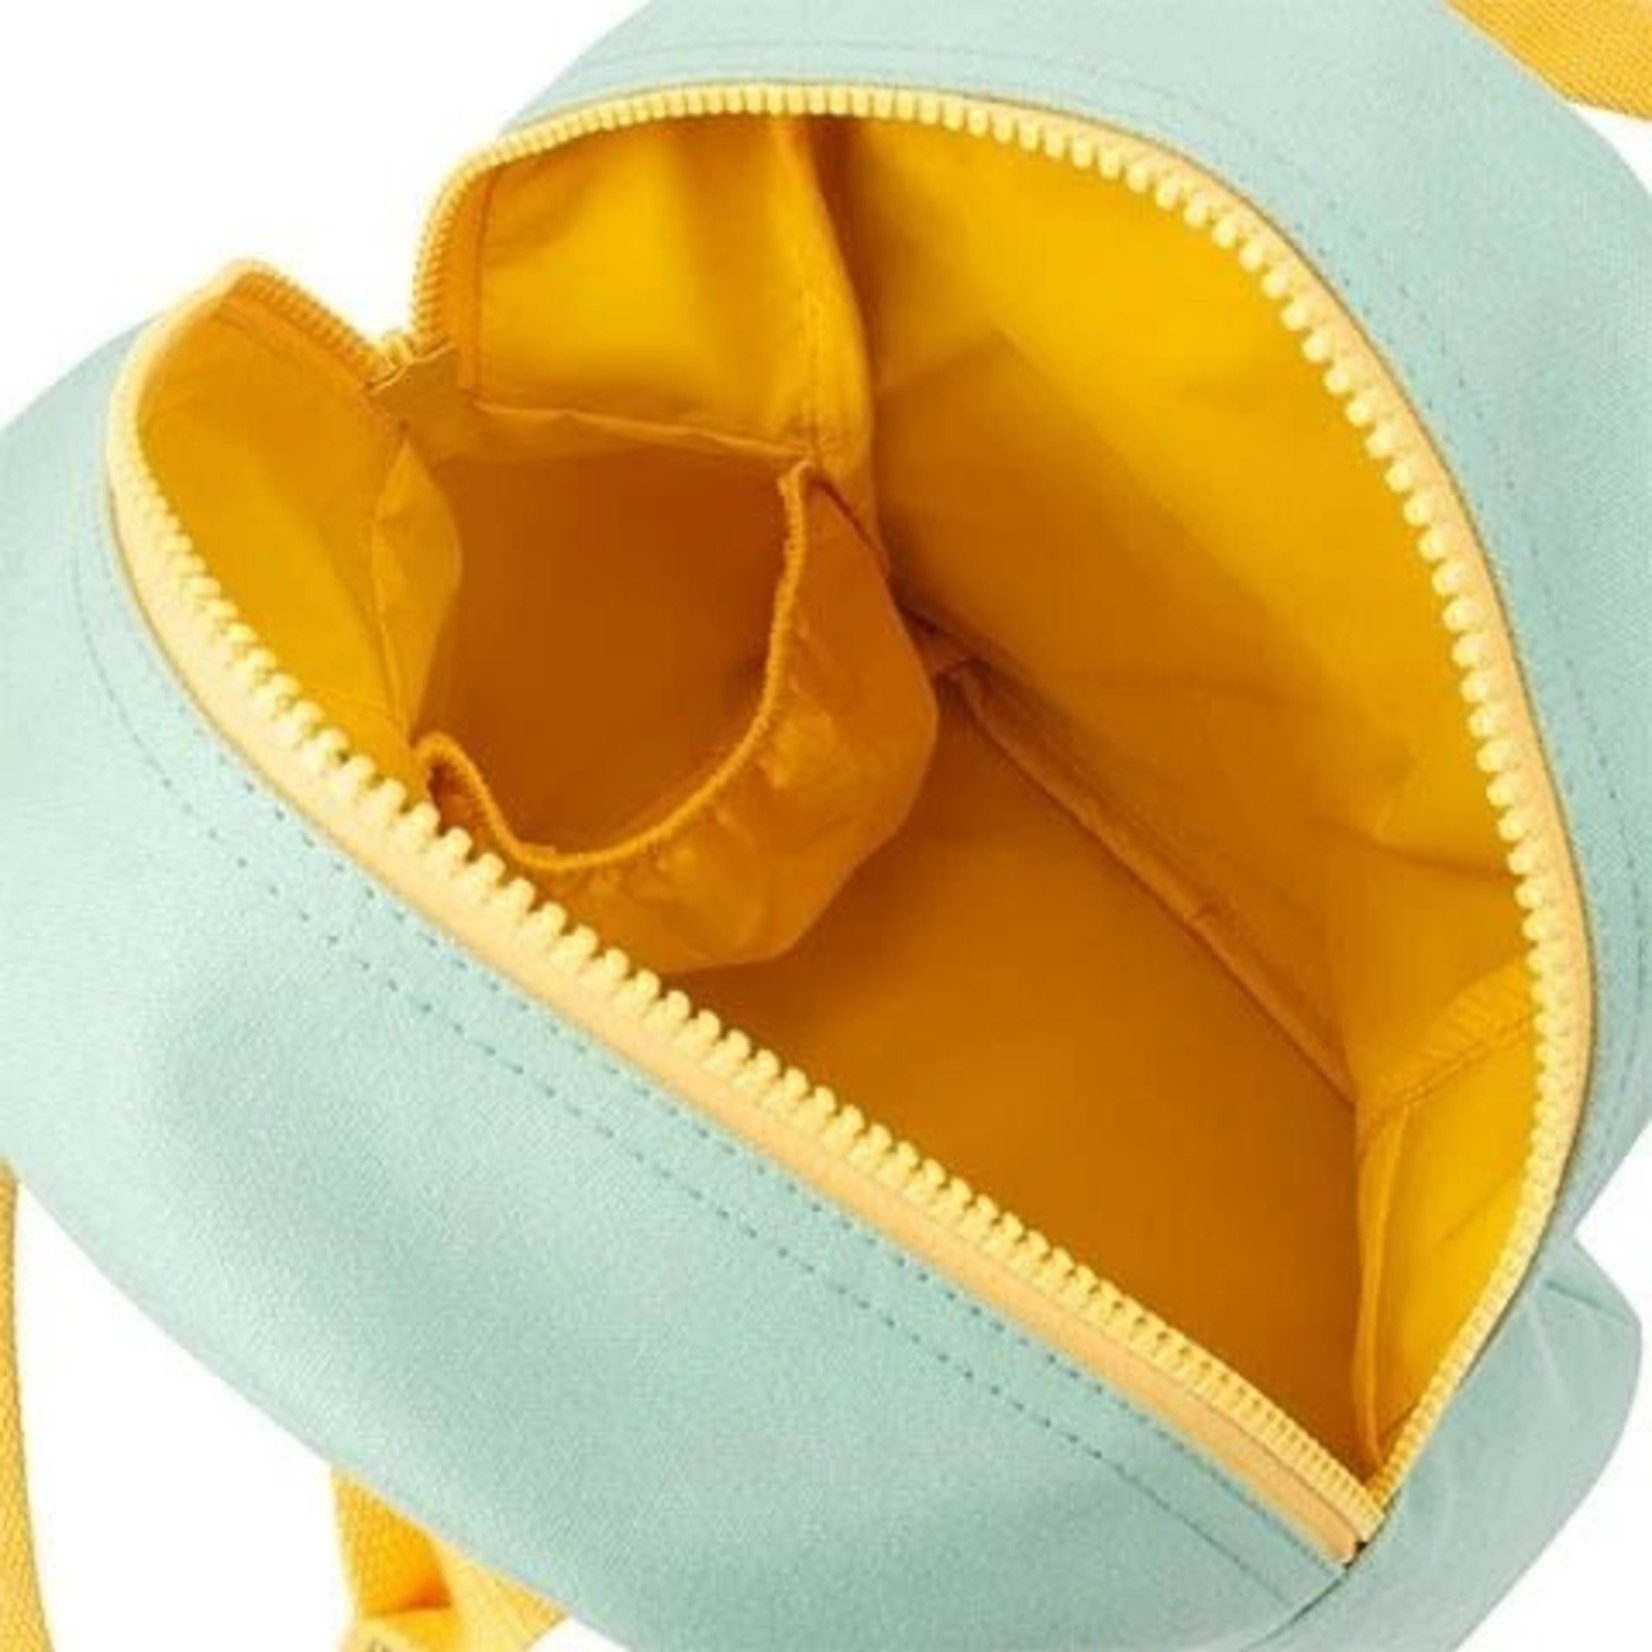 fluf happy bread mint lunch tote